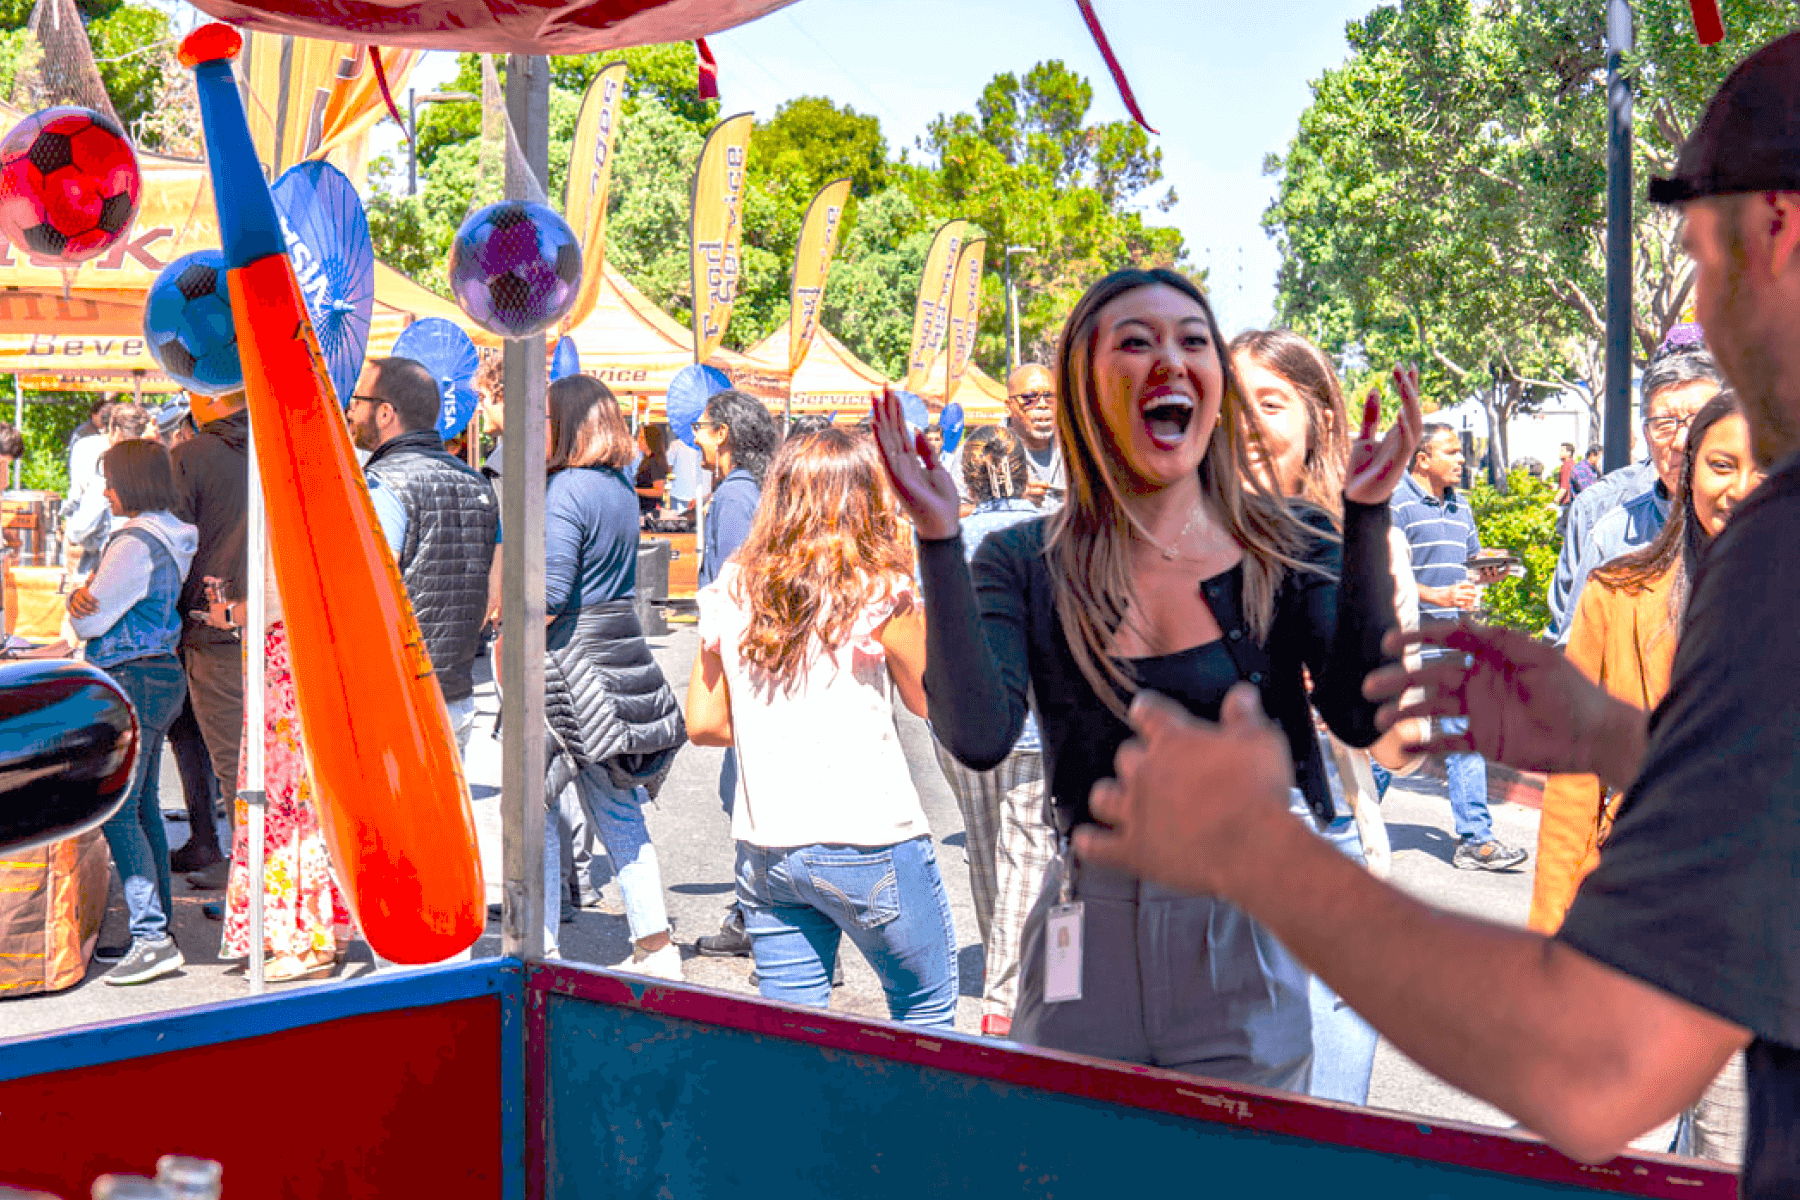 A woman waves her hands excitedly at a carnival game stand.